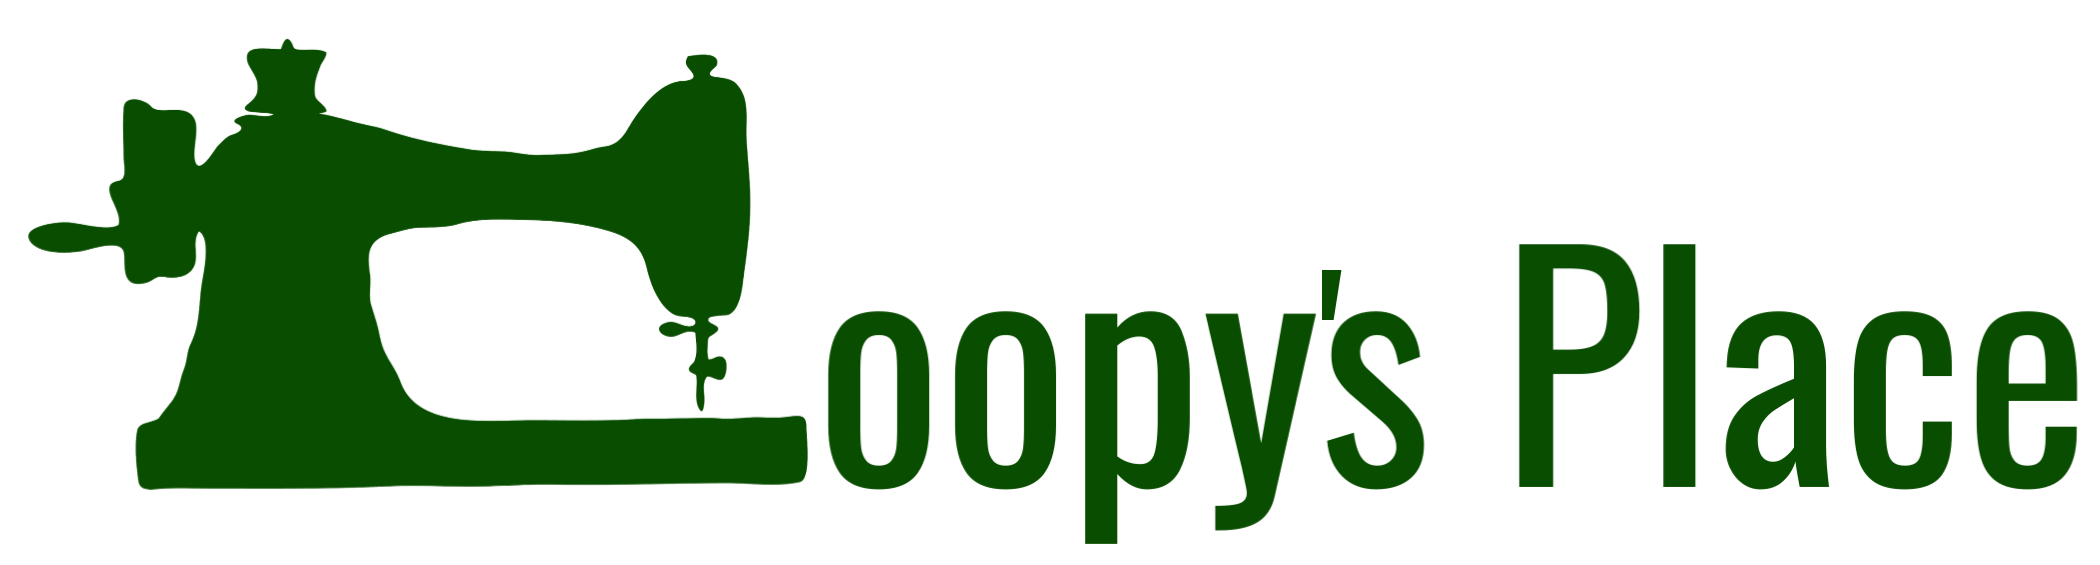 Loopy's Place logo